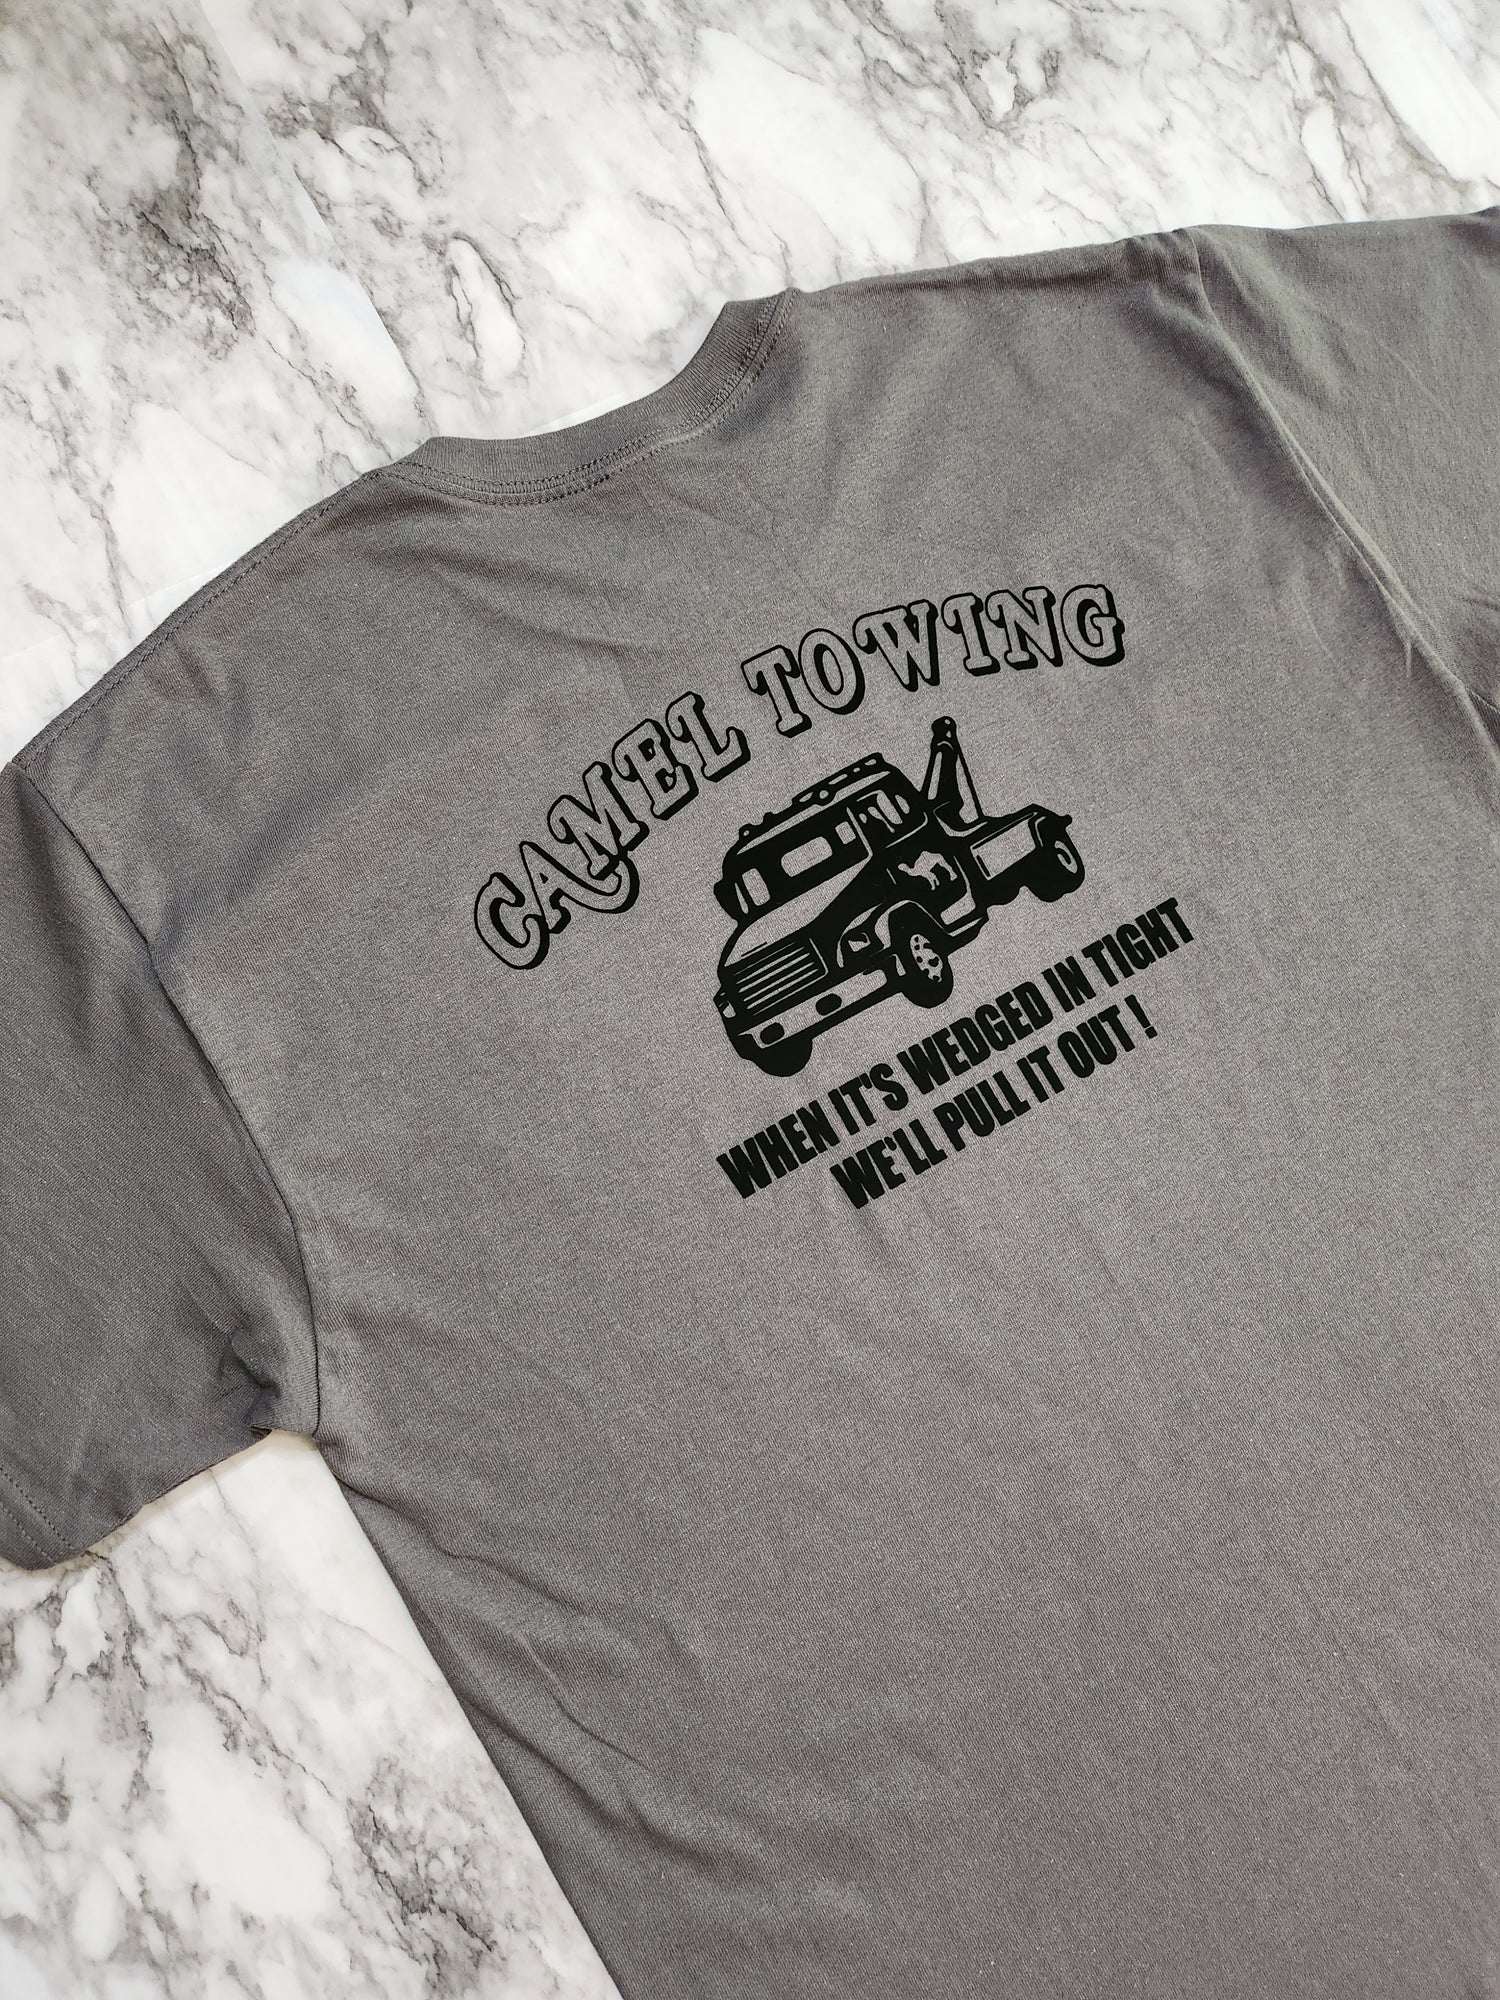 Camel Towing T-Shirt - Centre Ave Clothing Co.